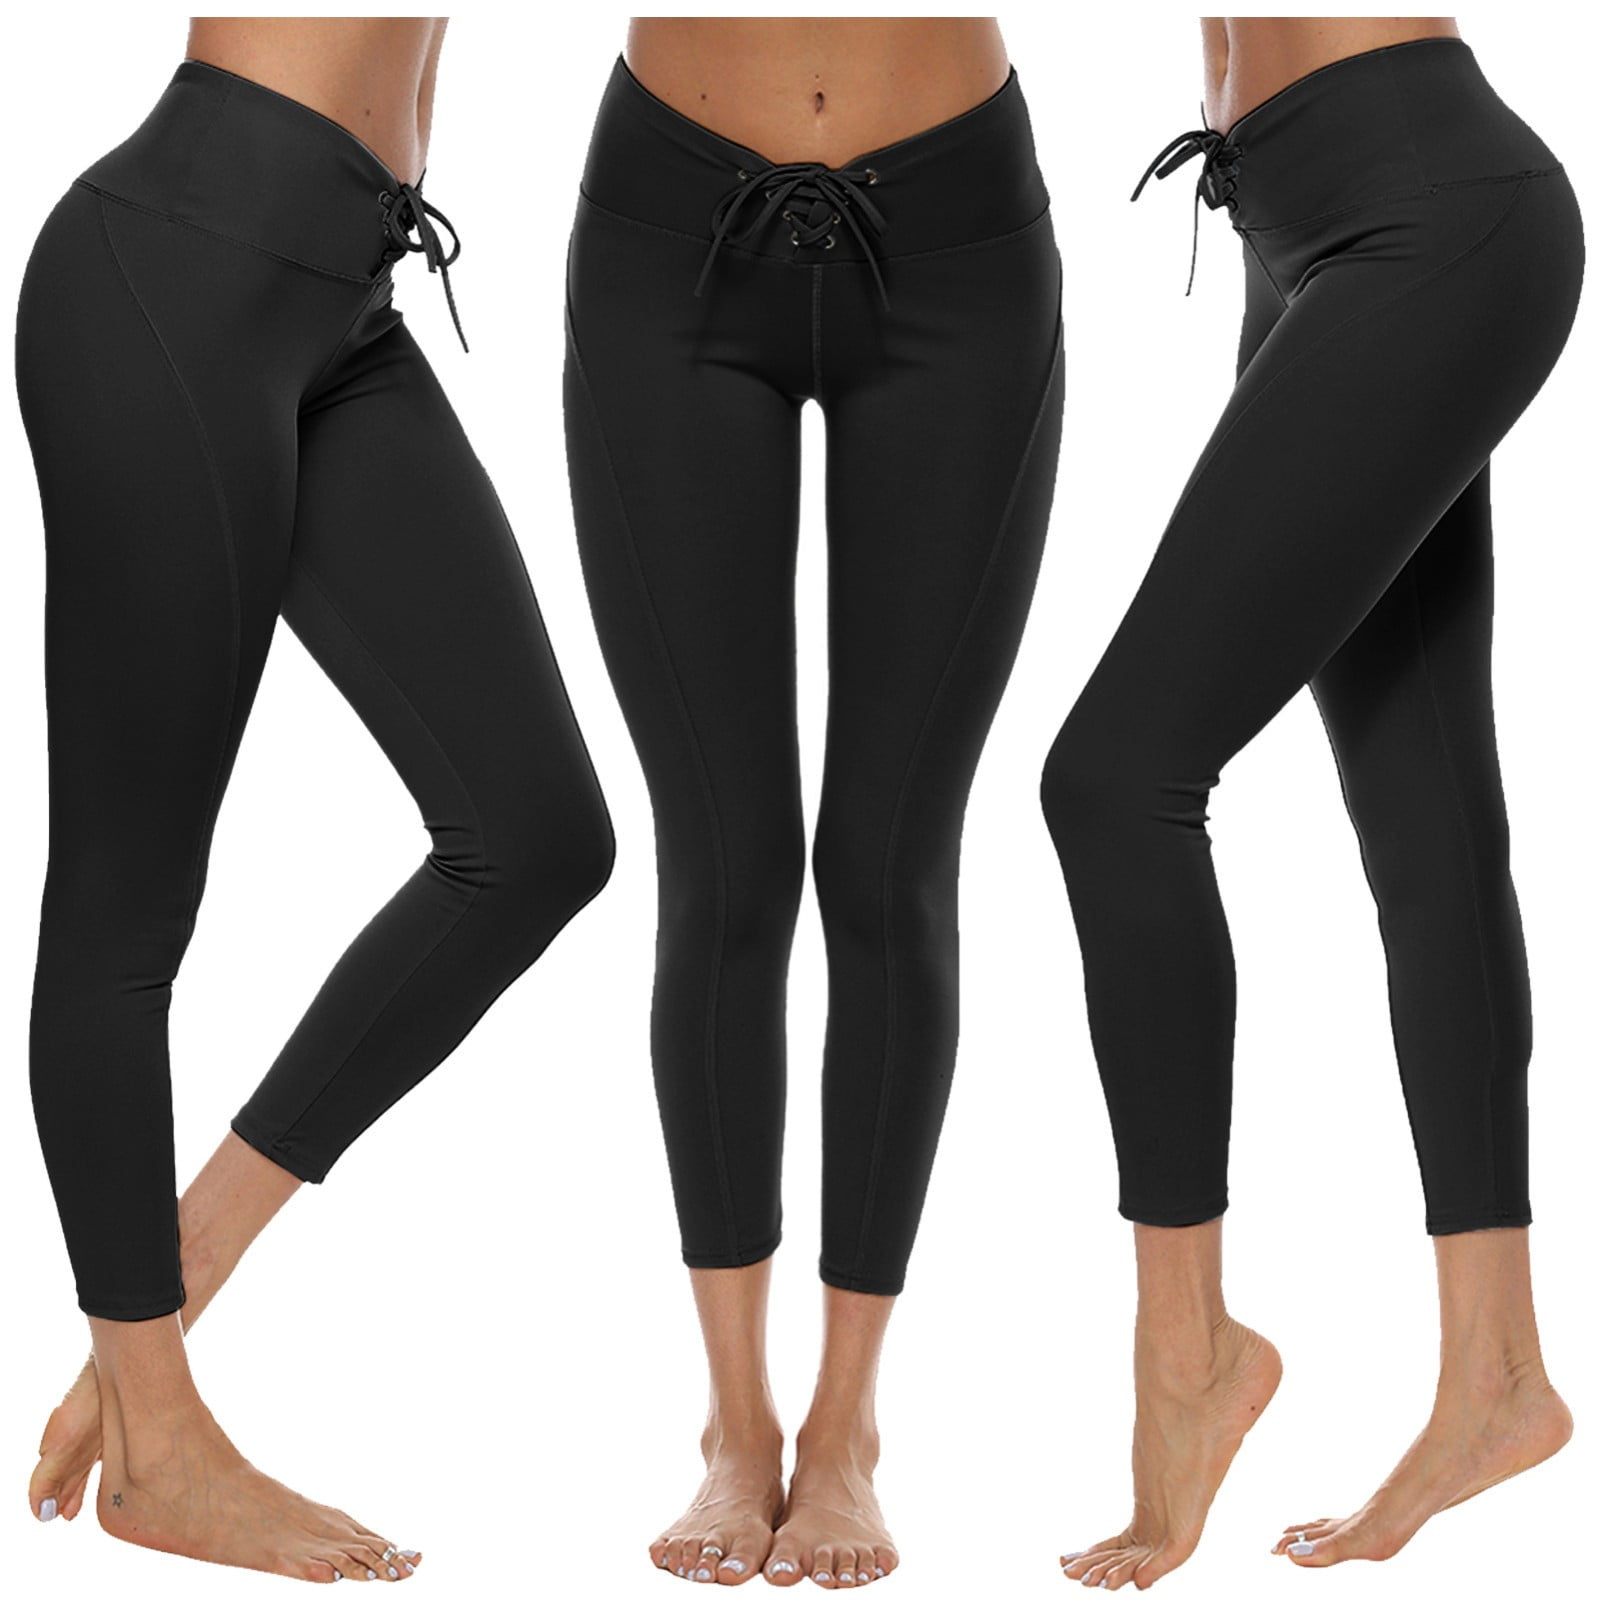 Ayolanni Gym Leggings for Women Women's Fitness Sports Stretch High Waist  Skinny Yoga Pants With Pockets 